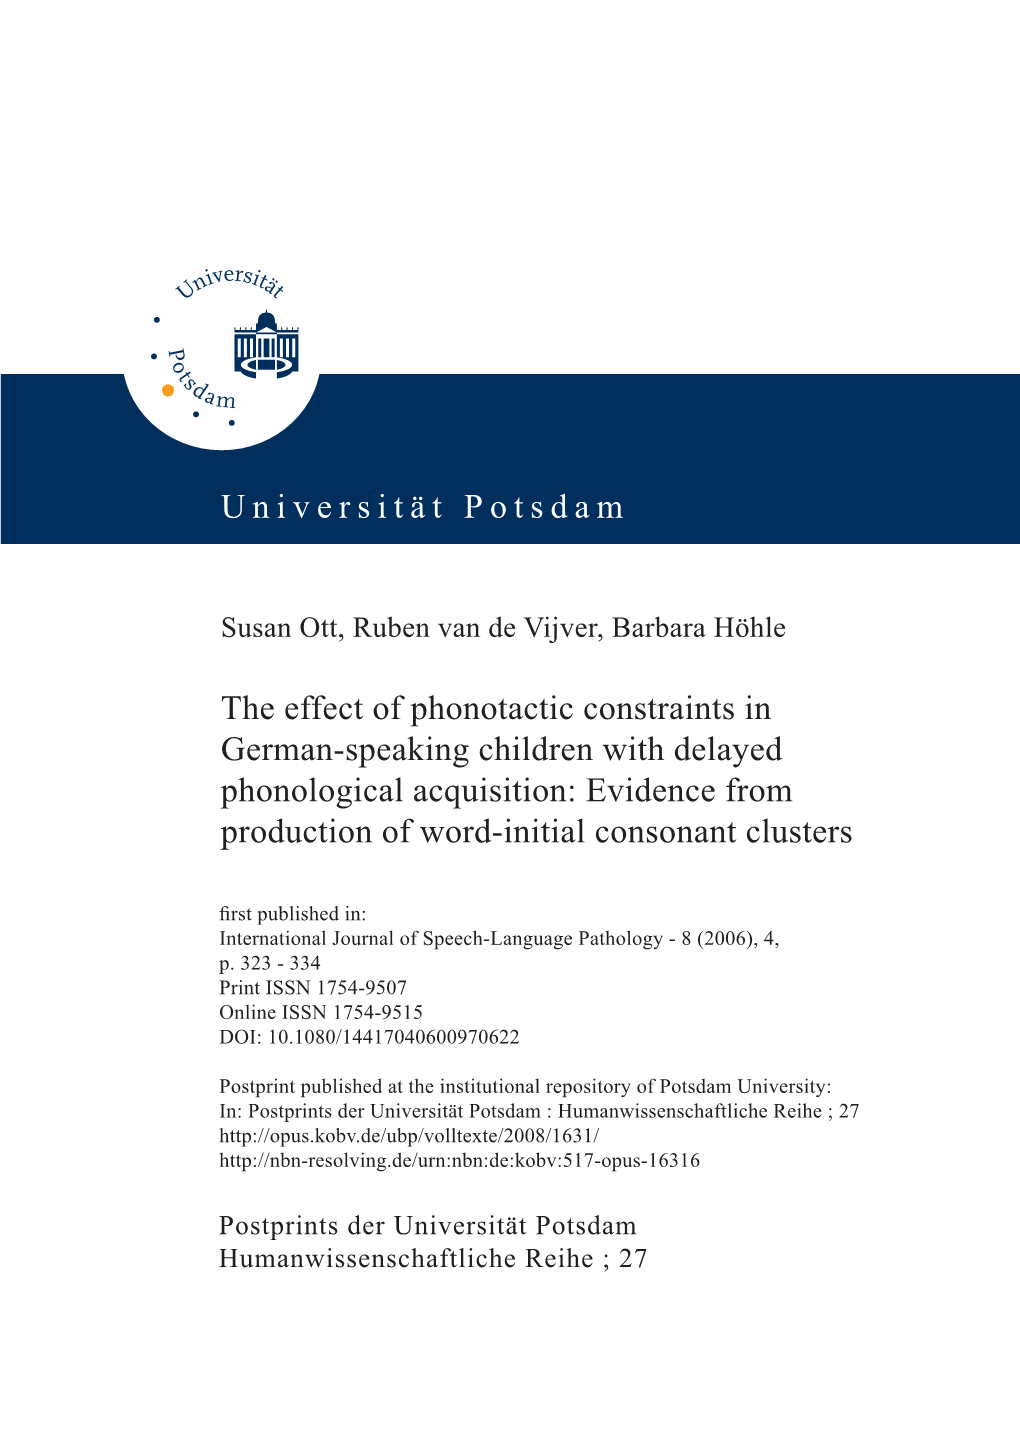 The Effect of Phonotactic Constraints in German-Speaking Children with Delayed Phonological Acquisition: Evidence from Production of Word-Initial Consonant Clusters